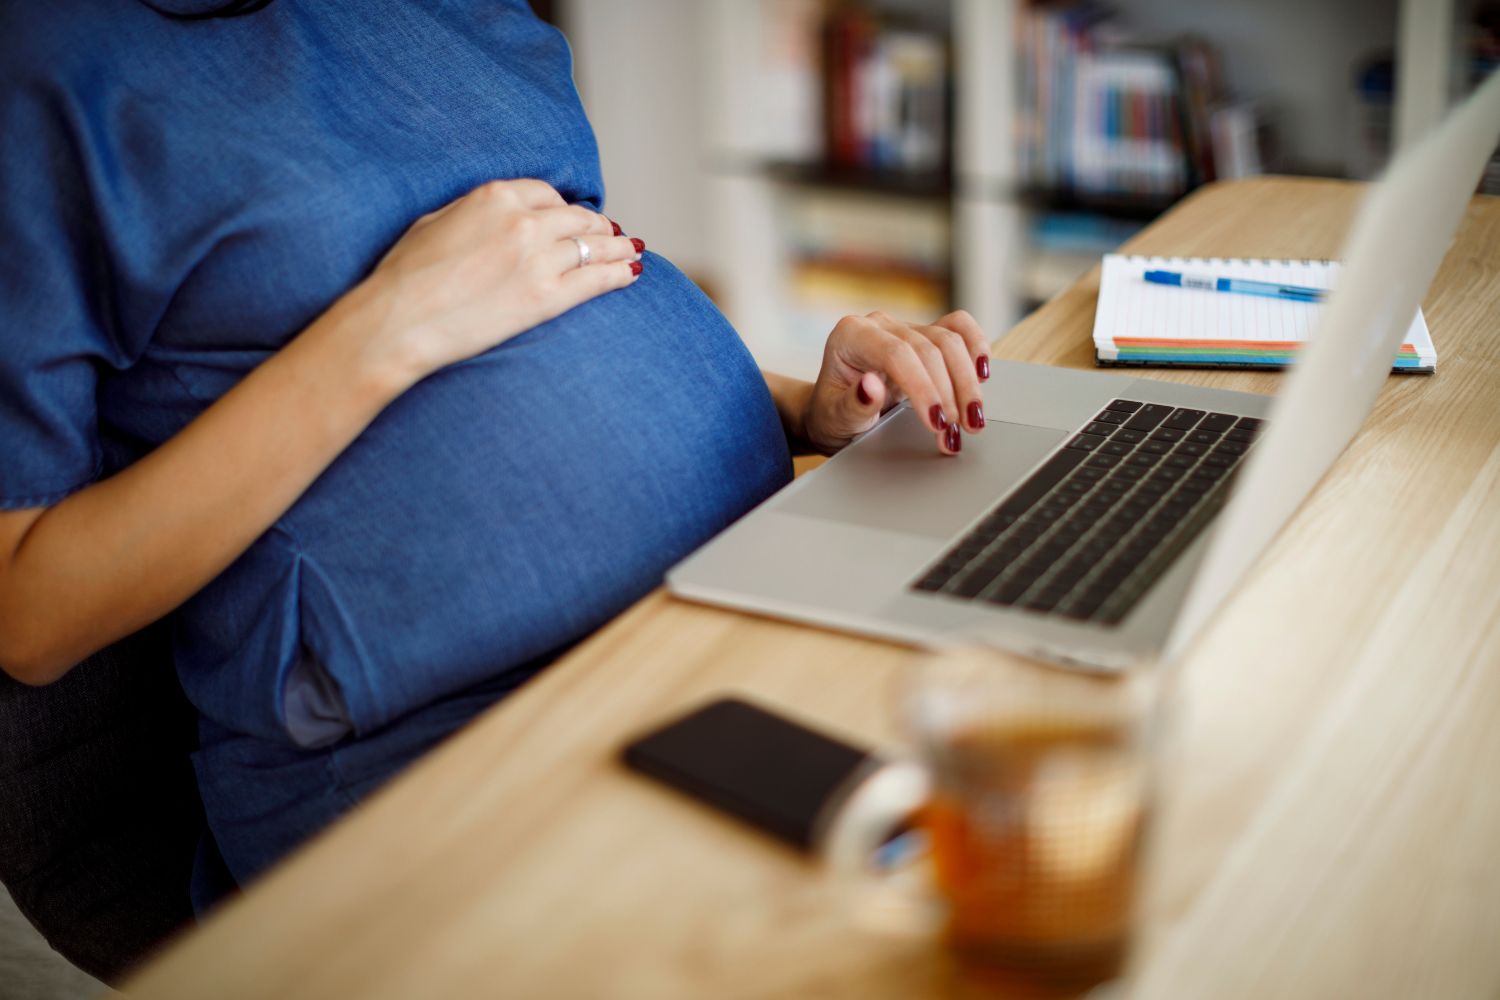 Pregnancy, Parenting and Your Rights At Work